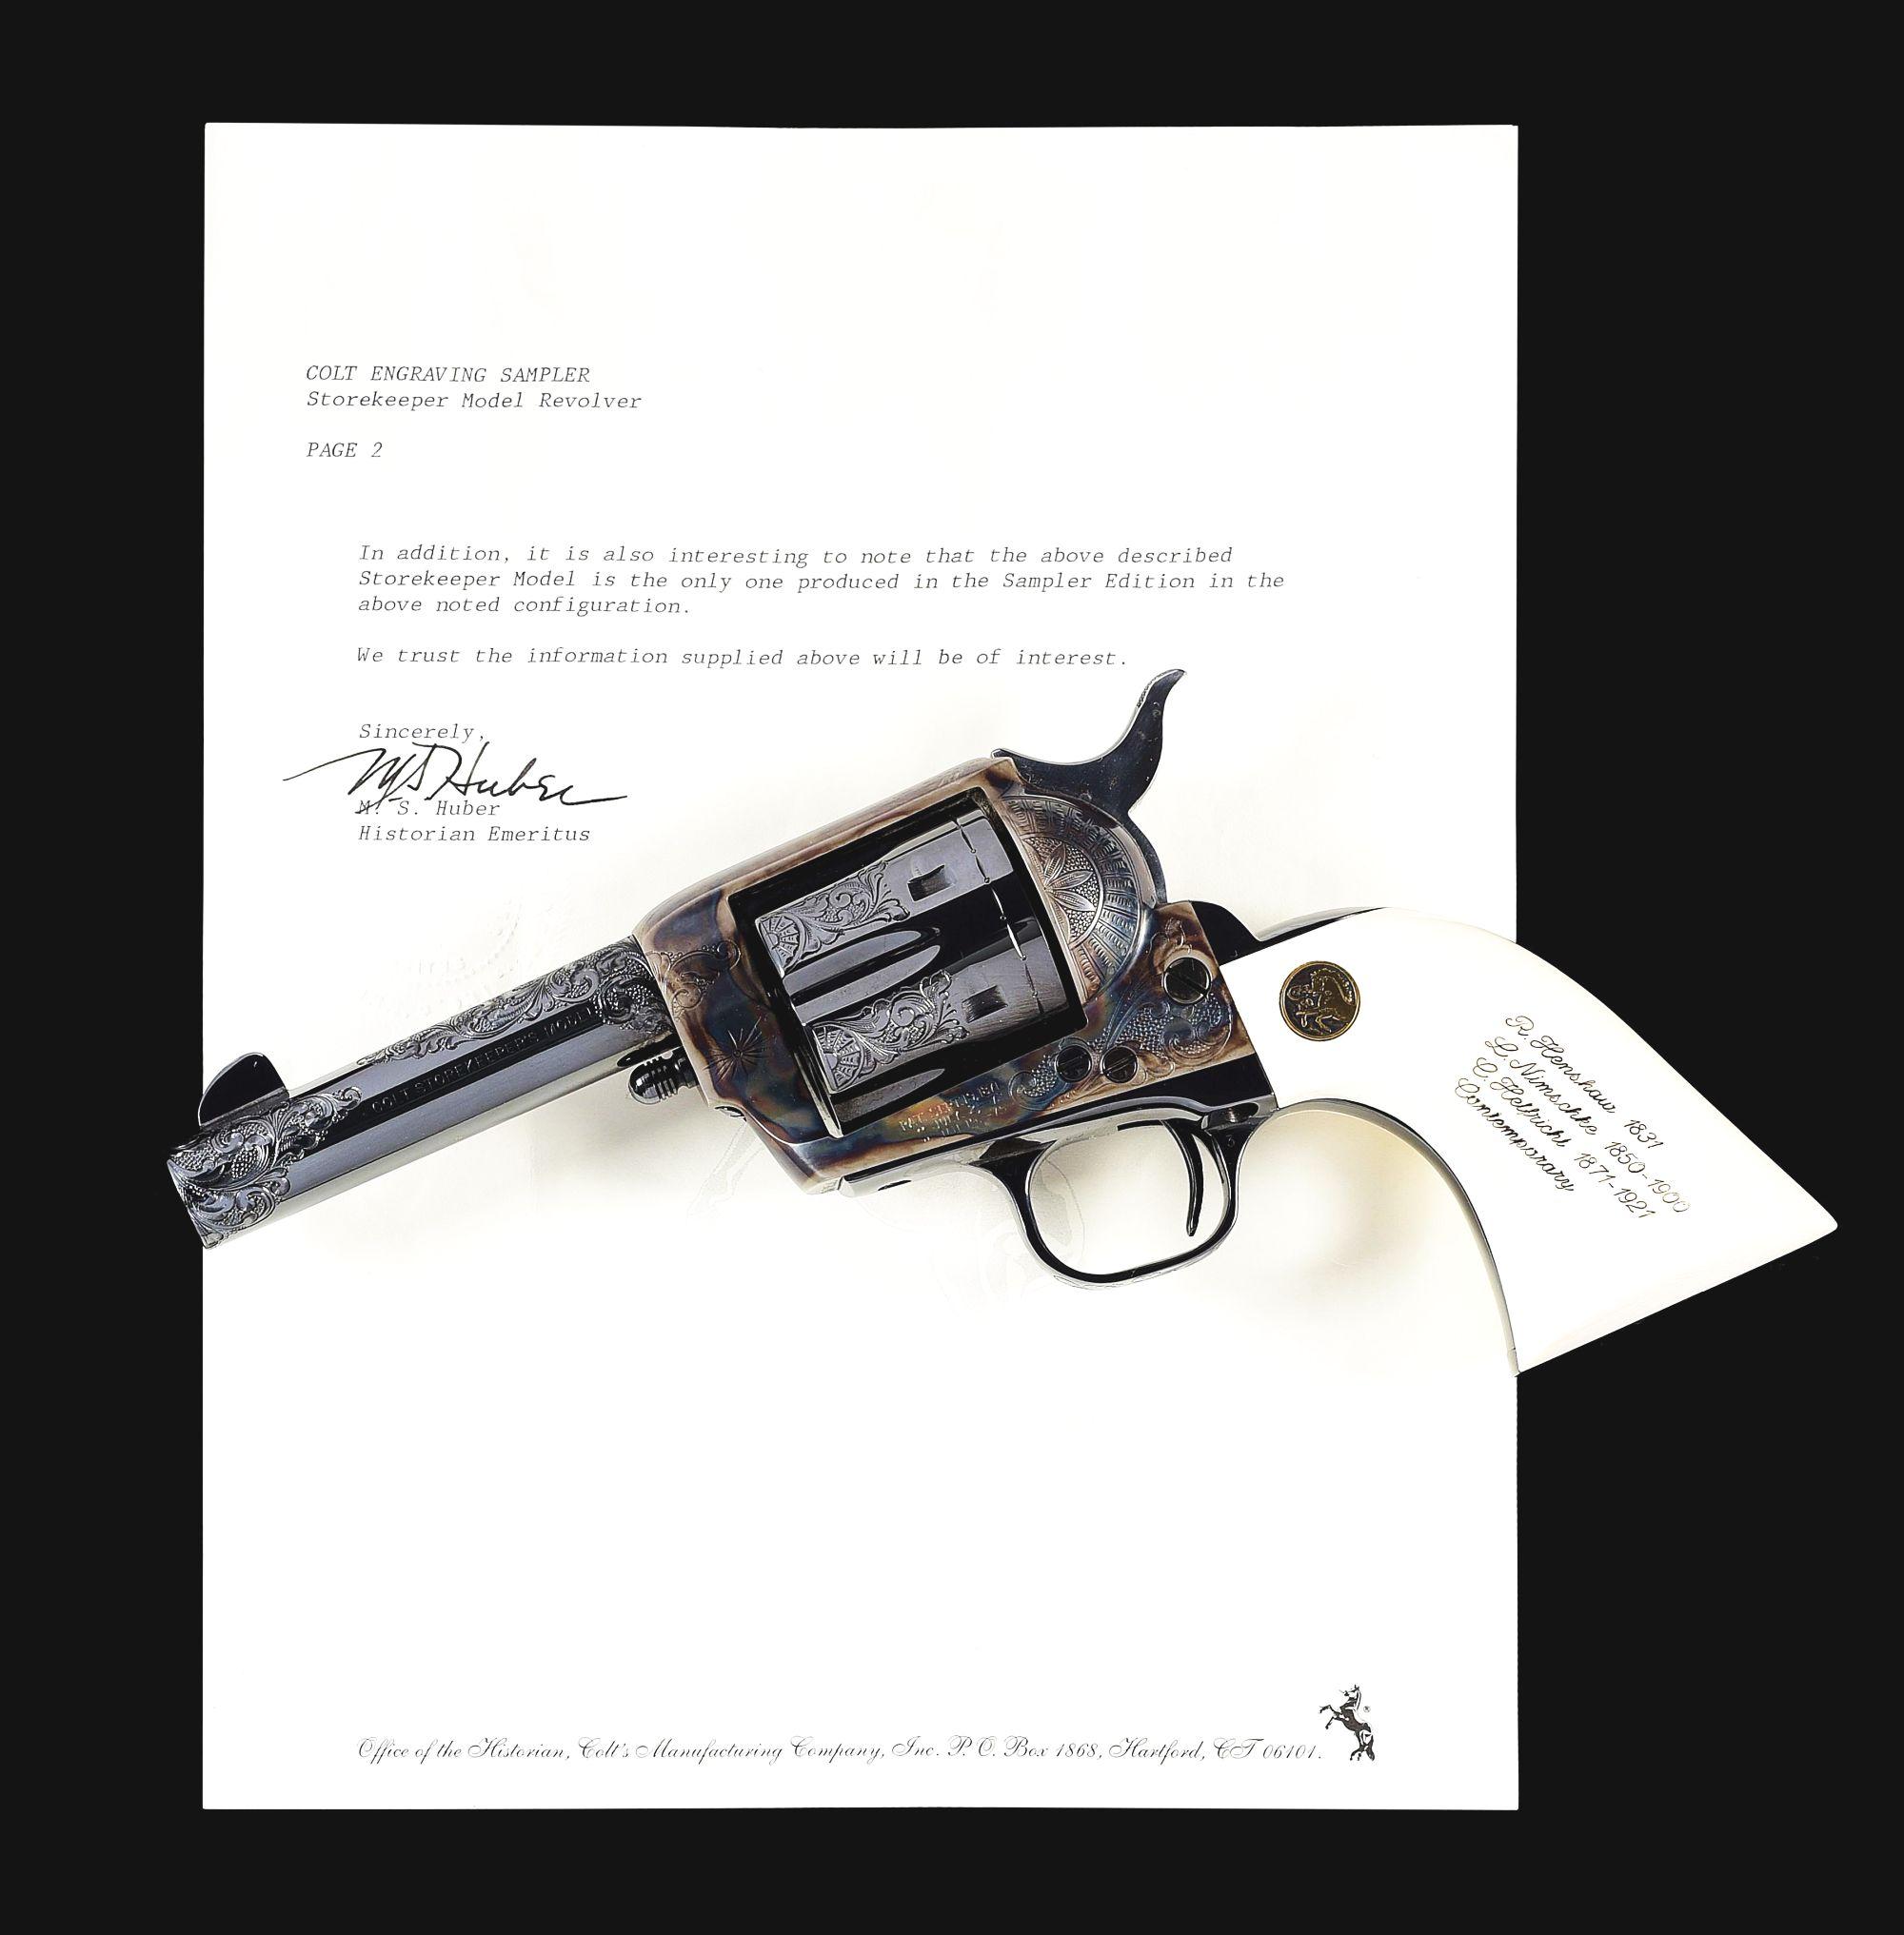 (M) COLT CUSTOM SHOP ENGRAVING SAMPLER "STOREKEEPER" MODEL SINGLE ACTION ARMY REVOLVER WITH FACTORY